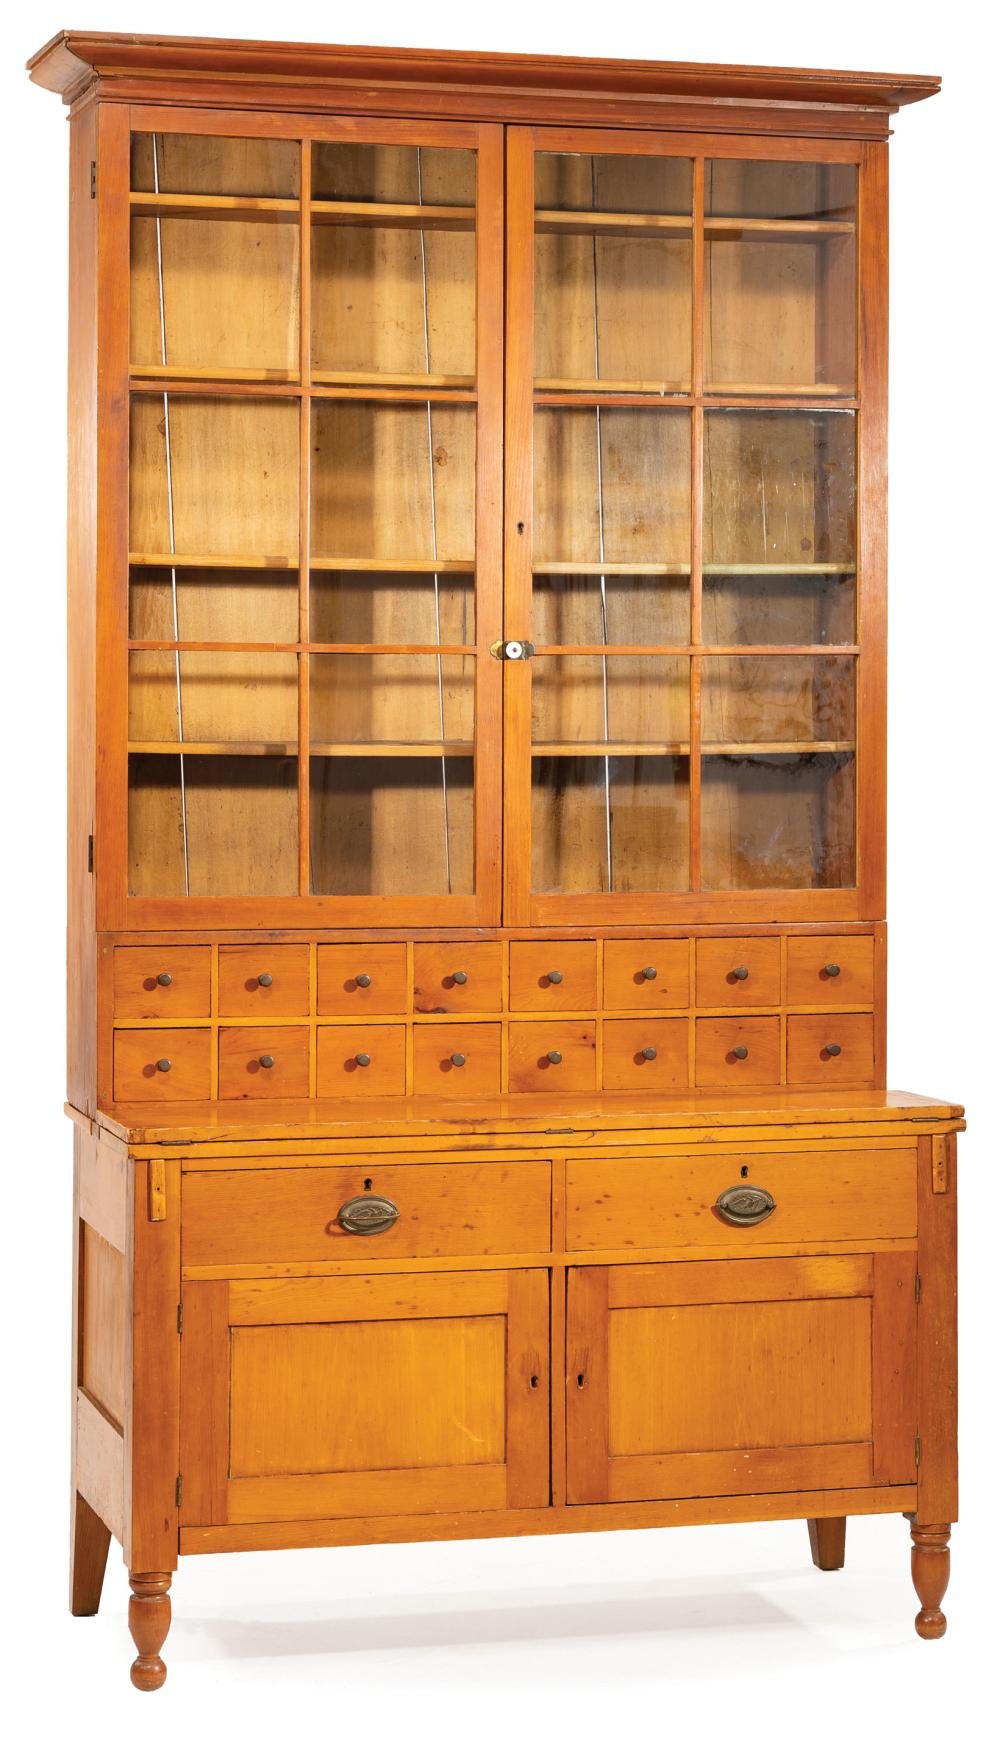 CARVED CHERRYWOOD AND PINE APOTHECARY 319e28